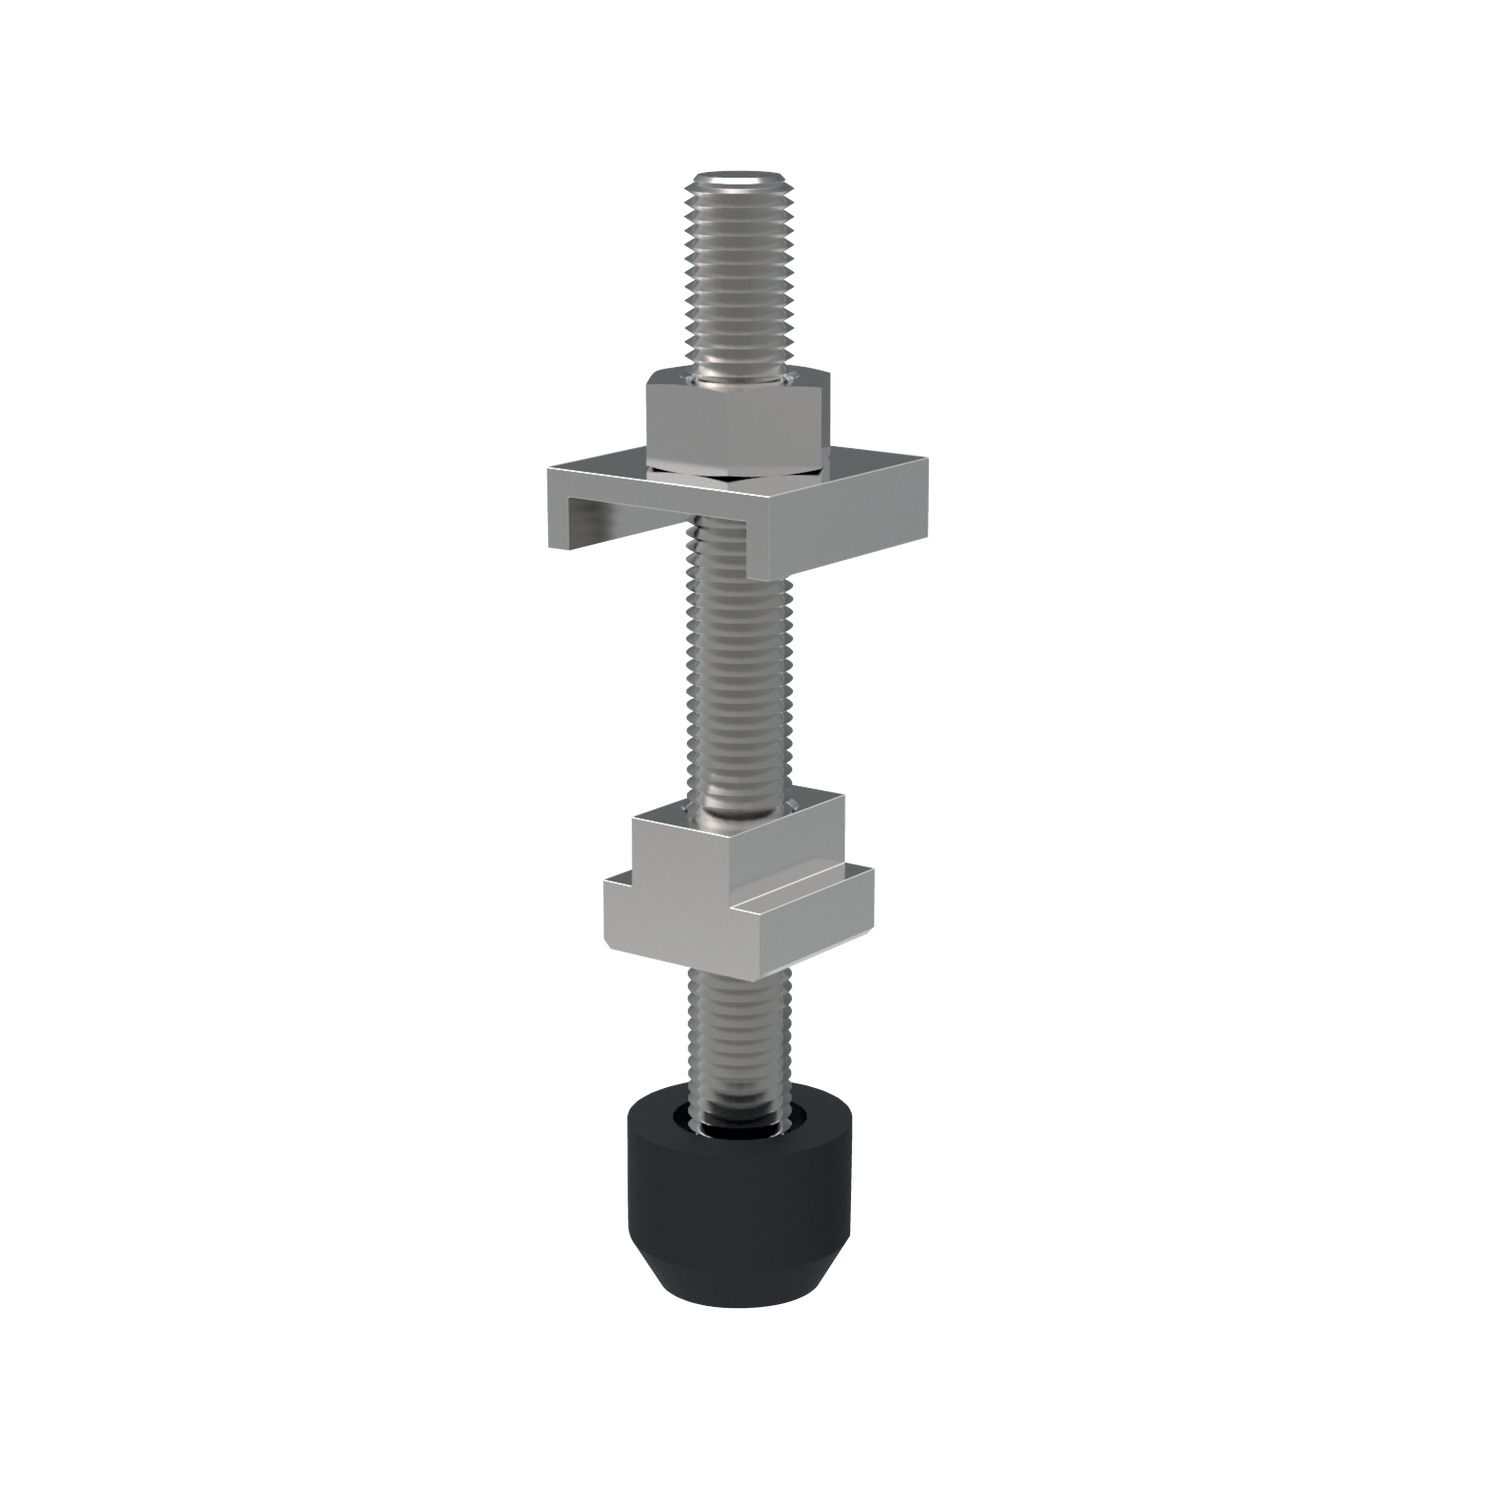 Product 45060.1, Clamping Screws for open arm toggle clamps / 